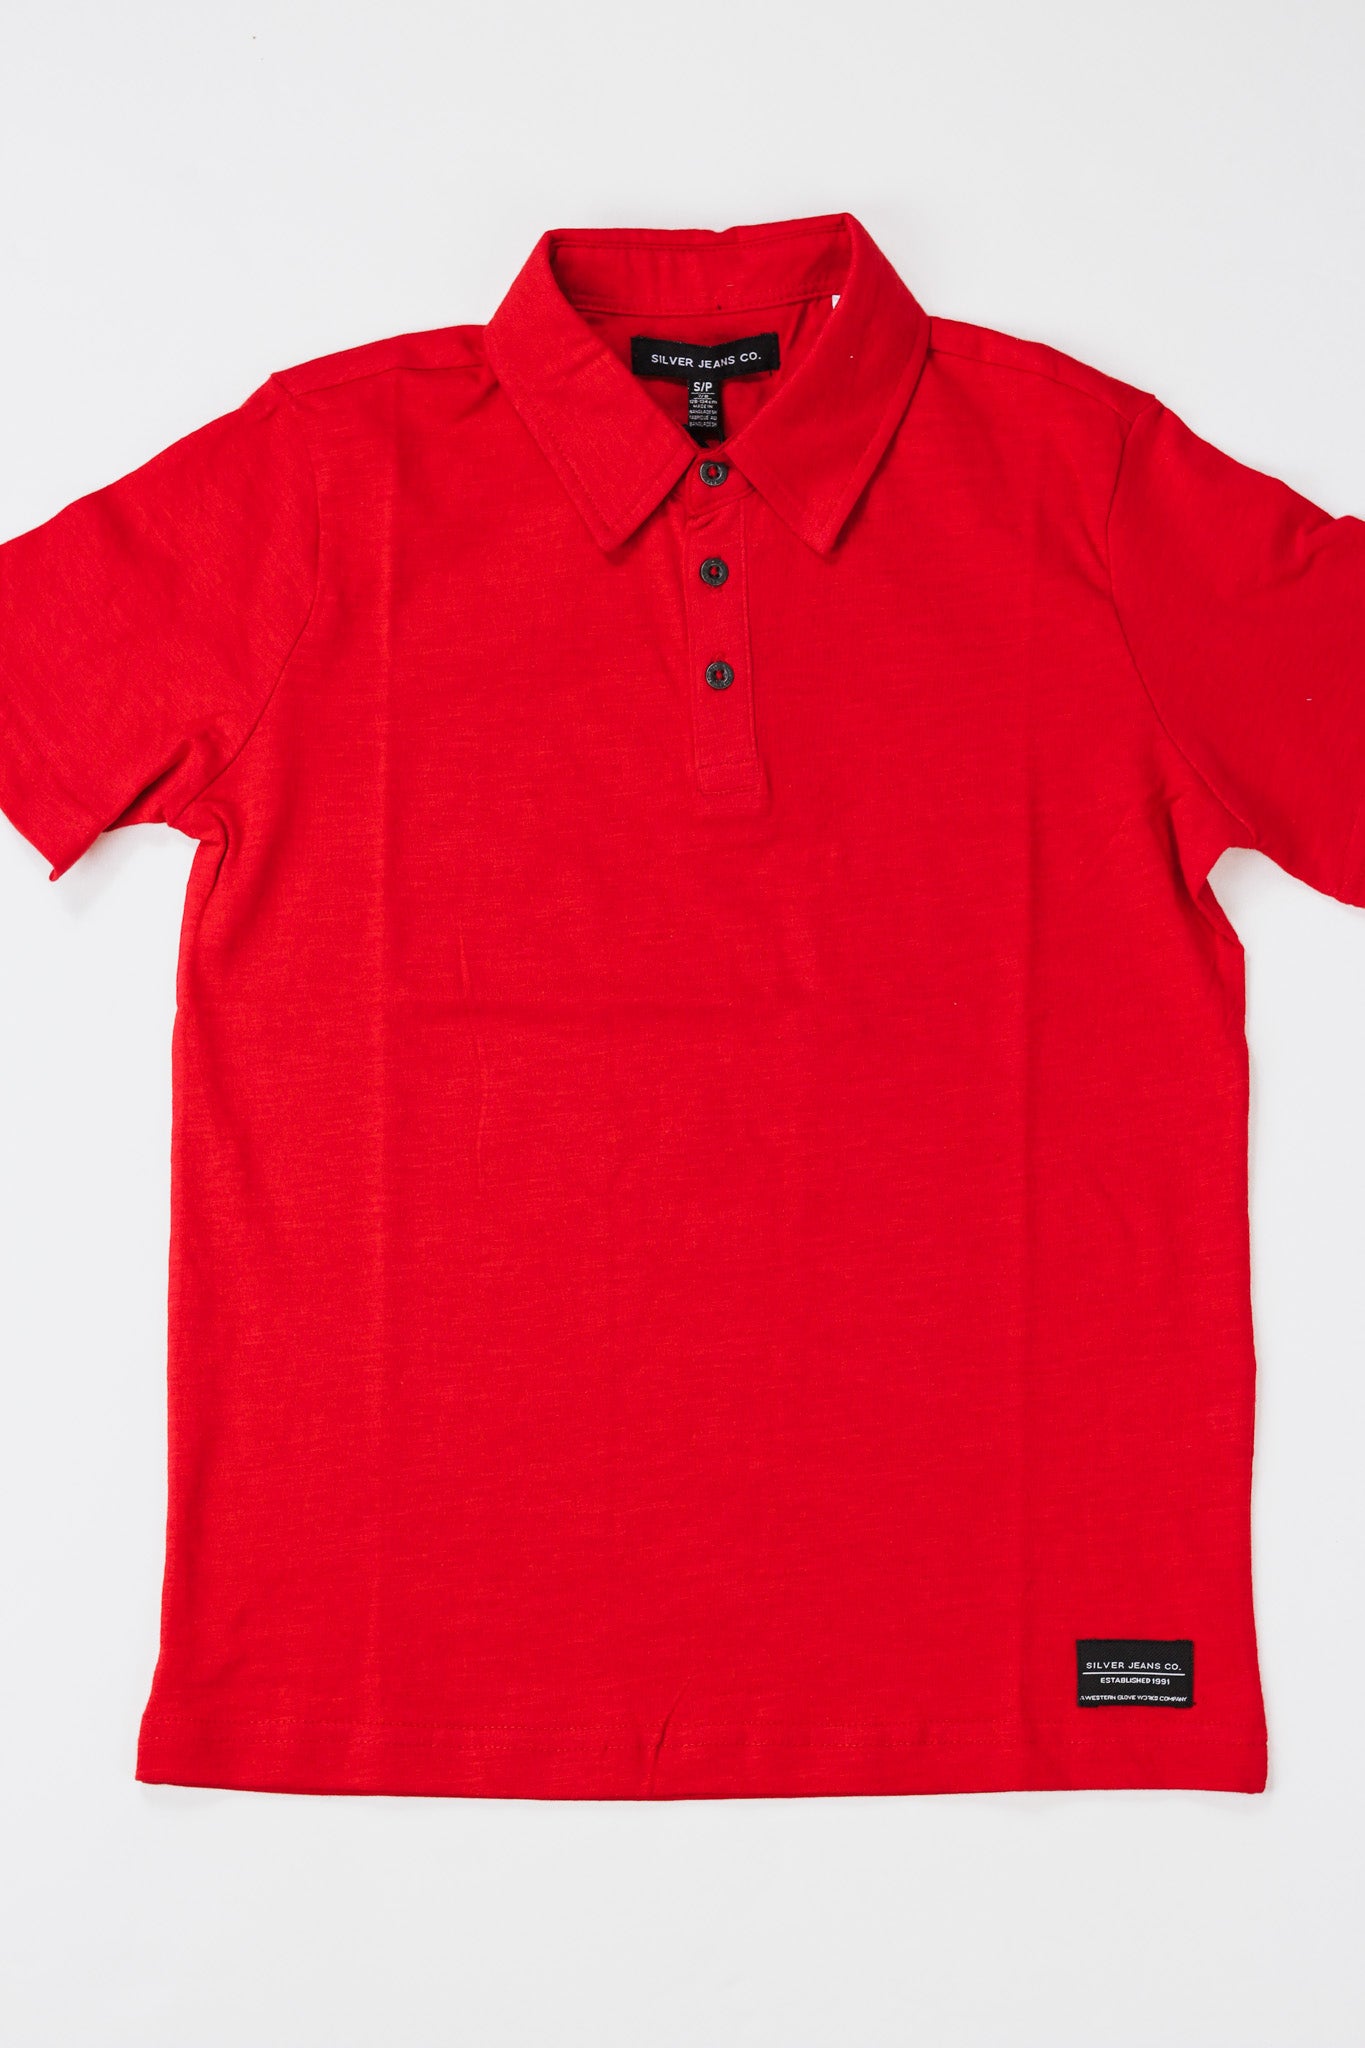 Boys Red Polo By Silver Jean Co